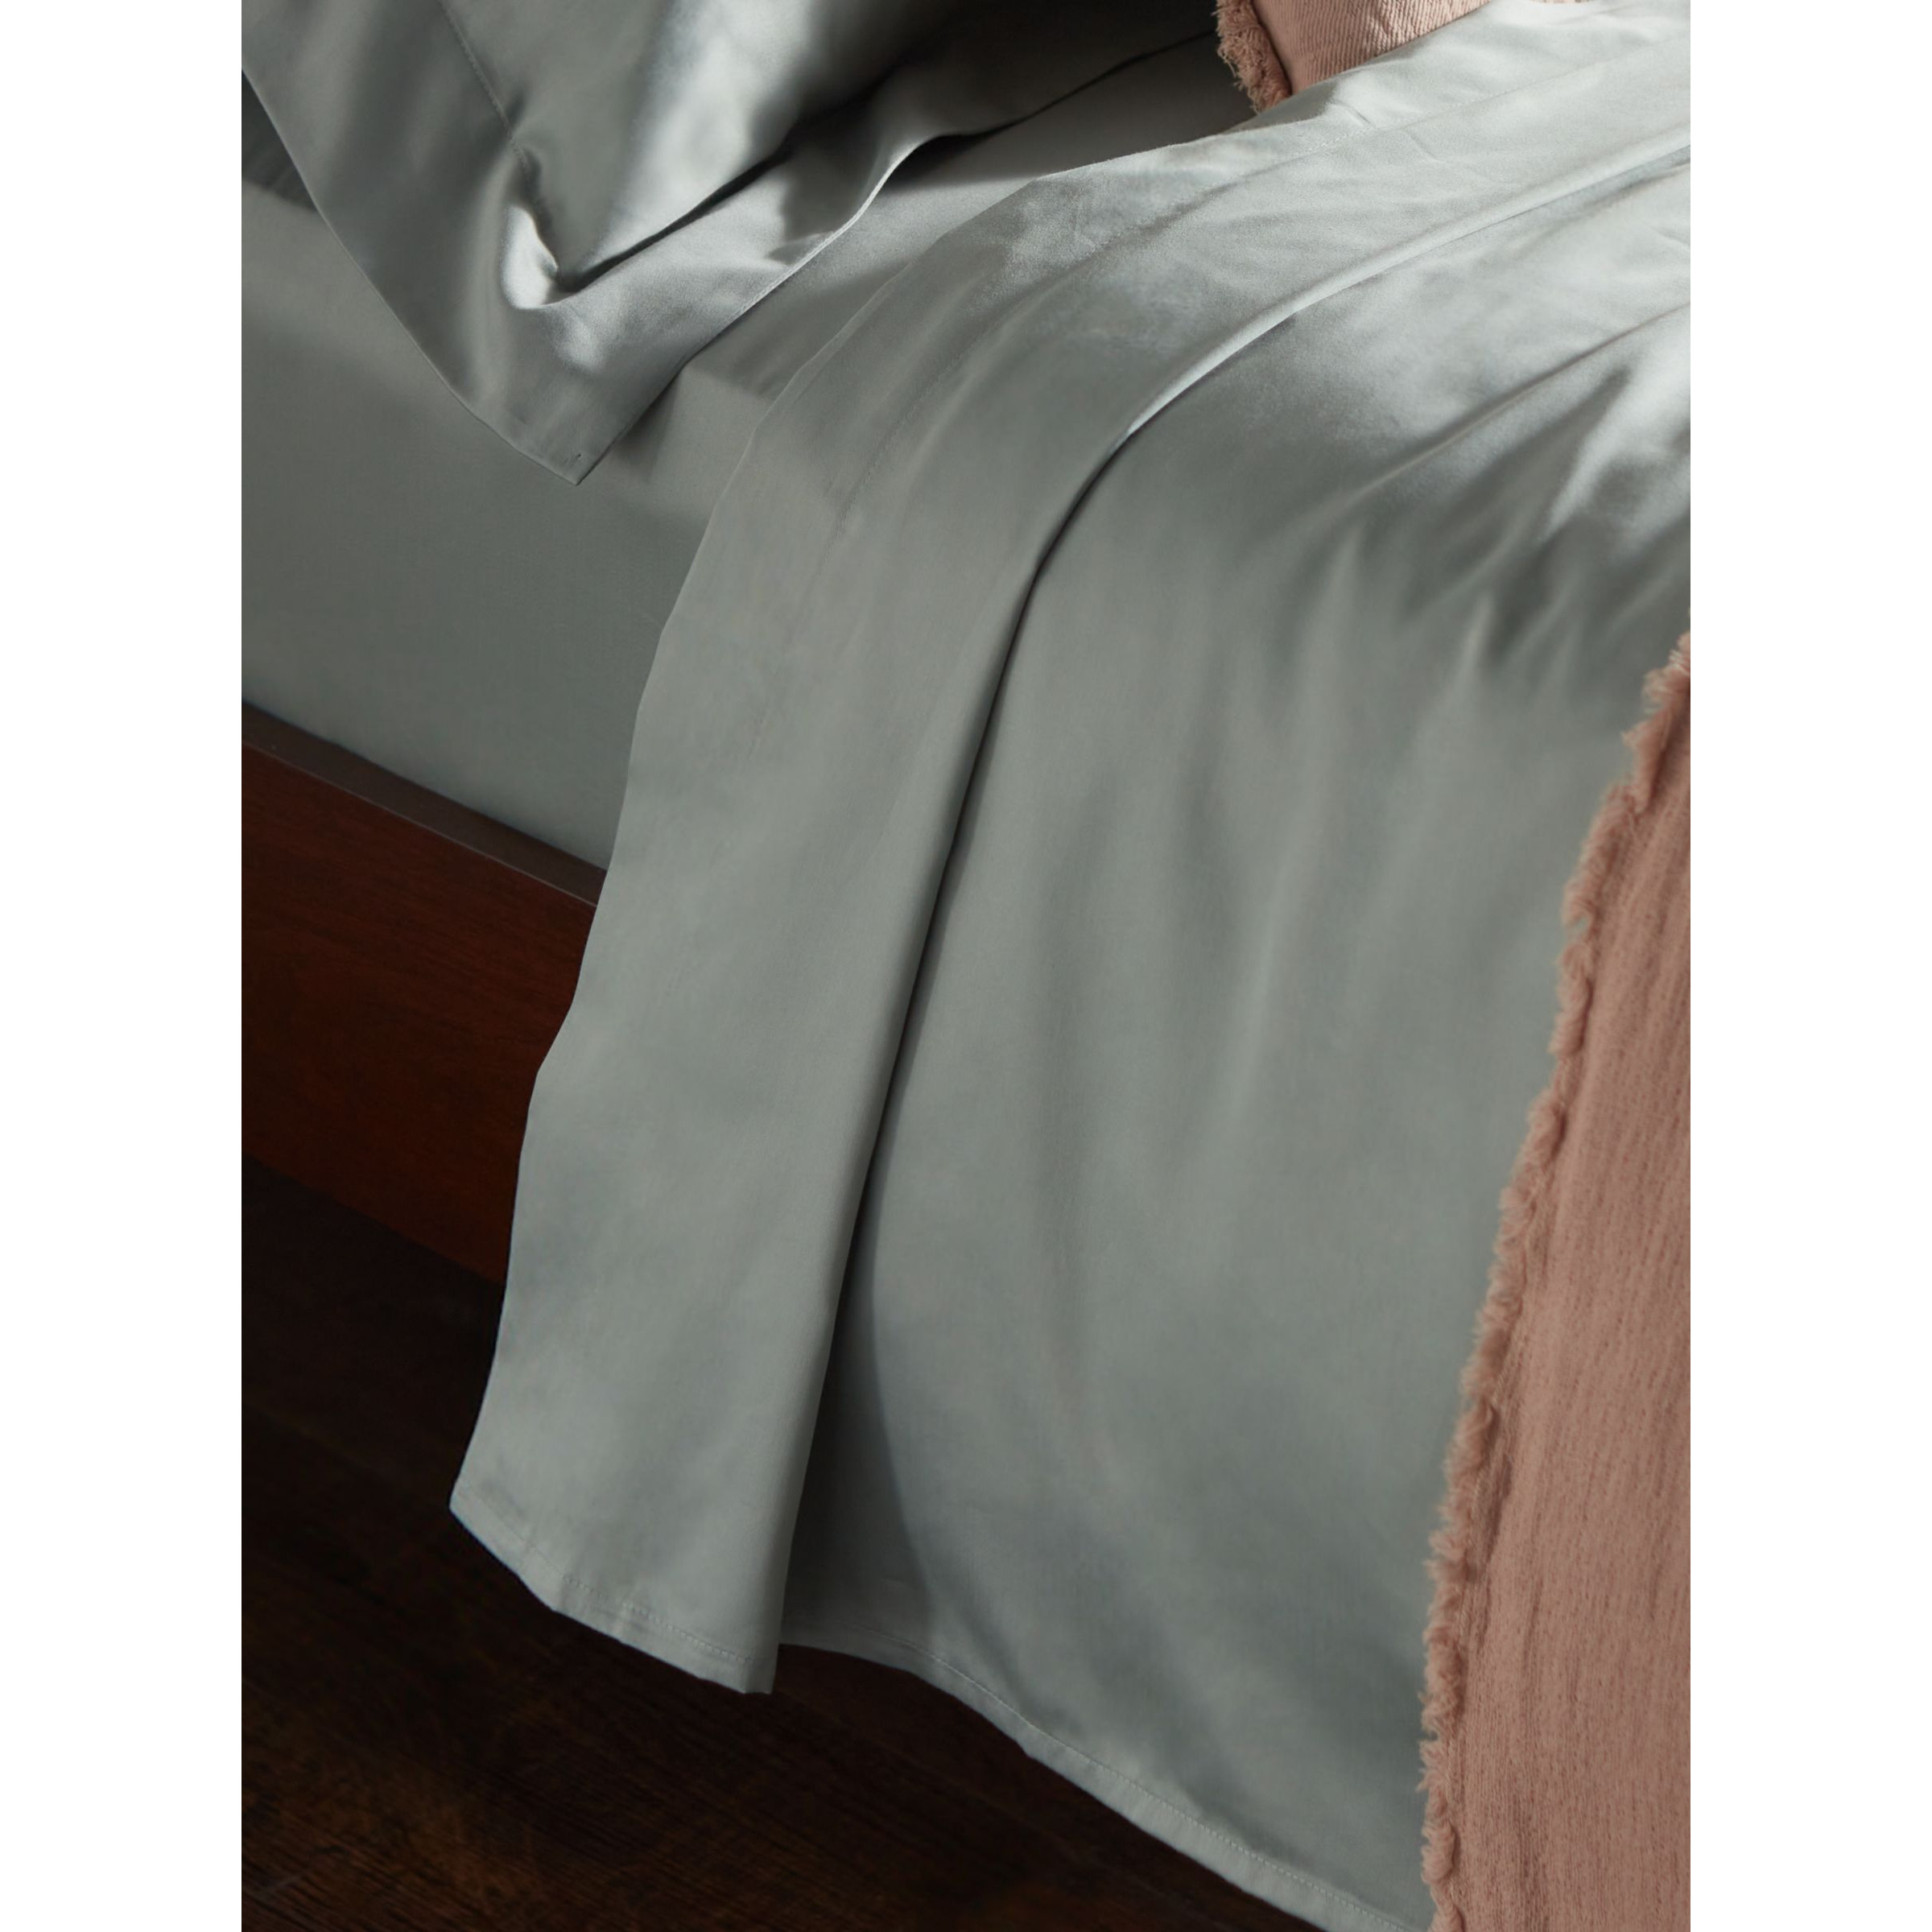 John Lewis Soft & Silky Specialist Temperature Balancing 400 Thread Count Cotton Flat Sheet - image 1